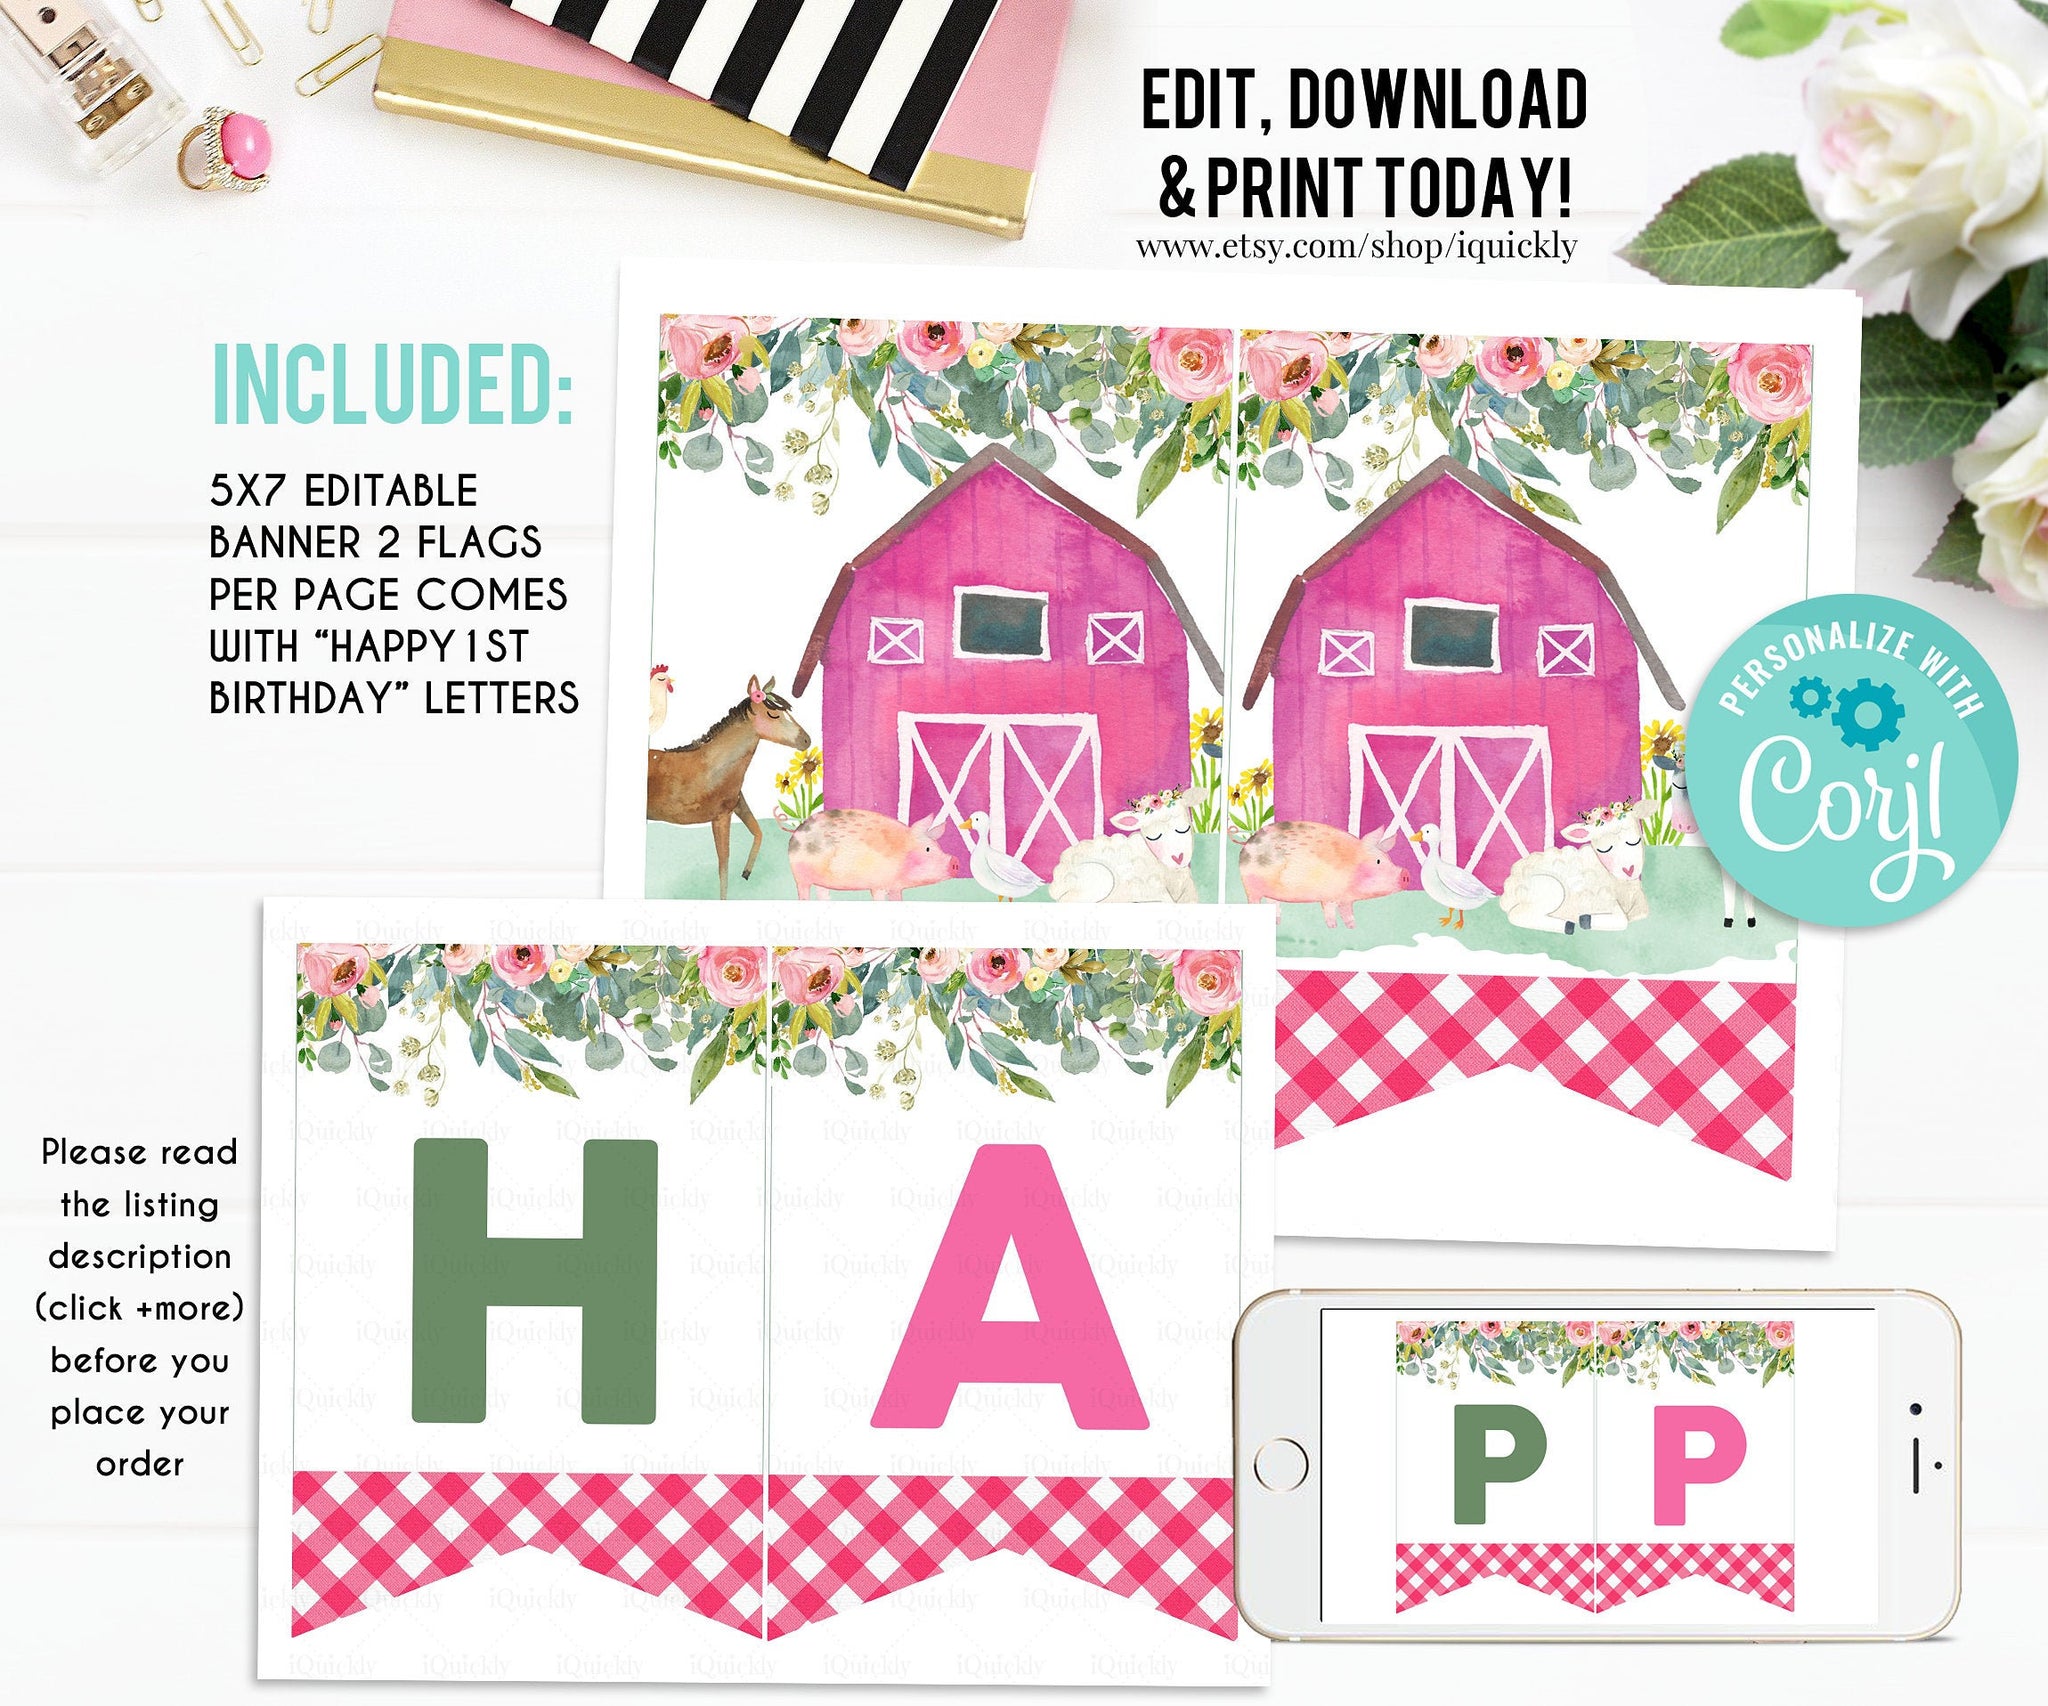 EDITABLE Farm Banner, Happy Birthday Banner, Girl Printable 1st Birthday bunting banner, Baby Shower Template, Printable Instant download